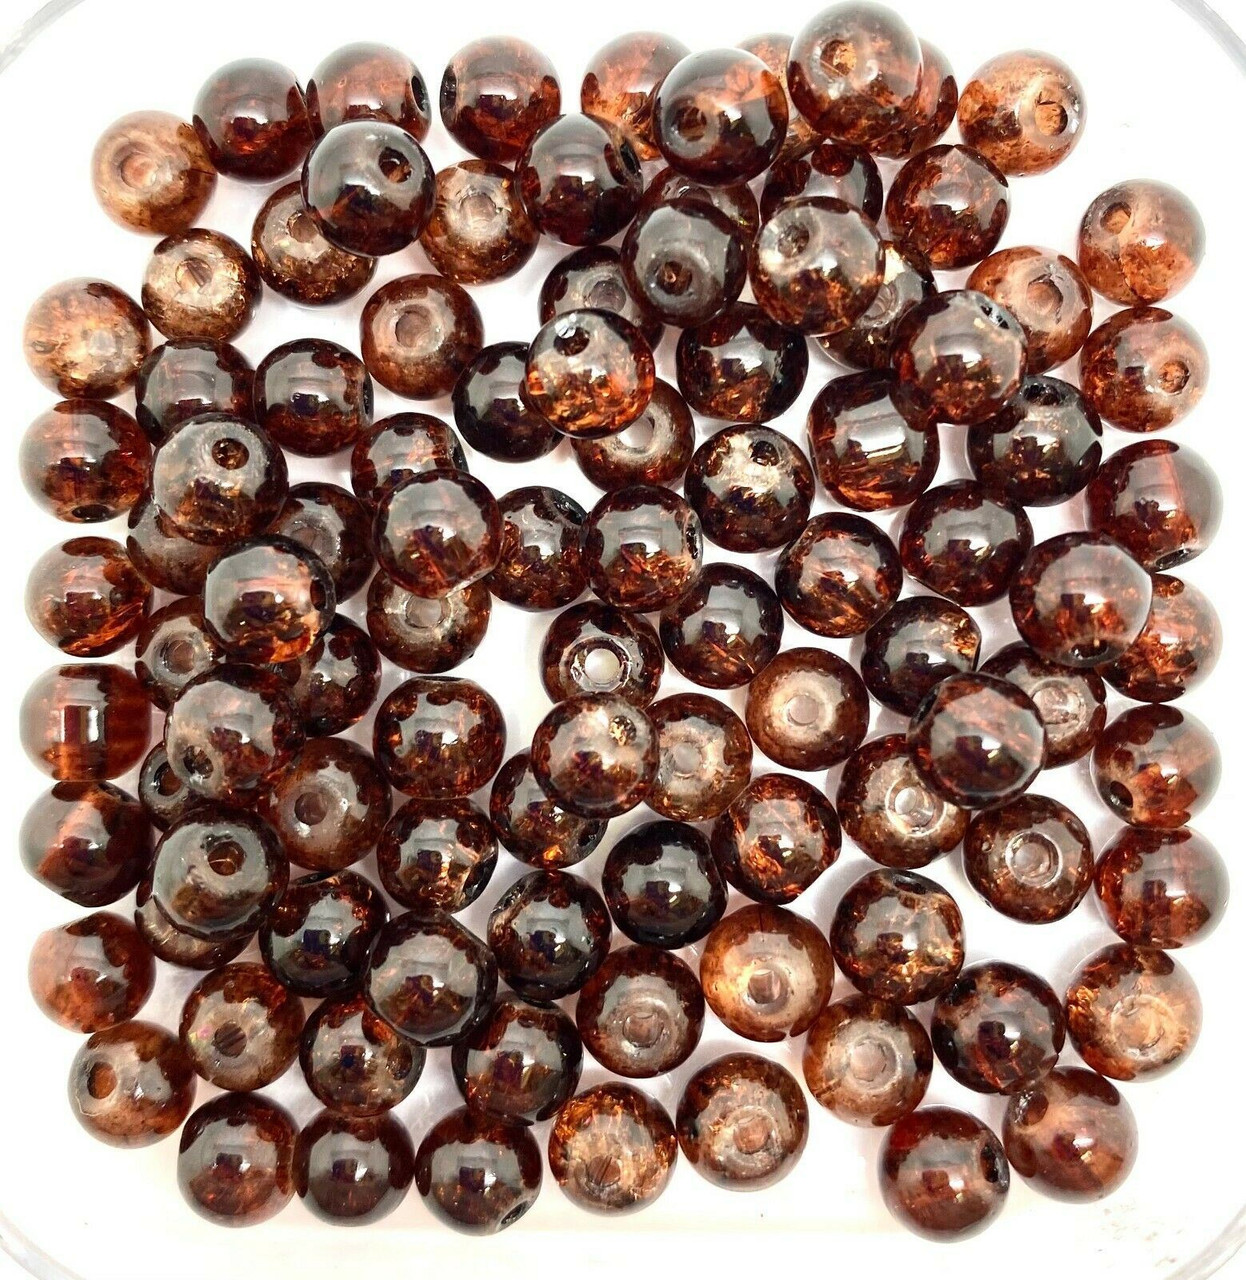 8mm Crackle Glass Beads - Brown, 50 beads